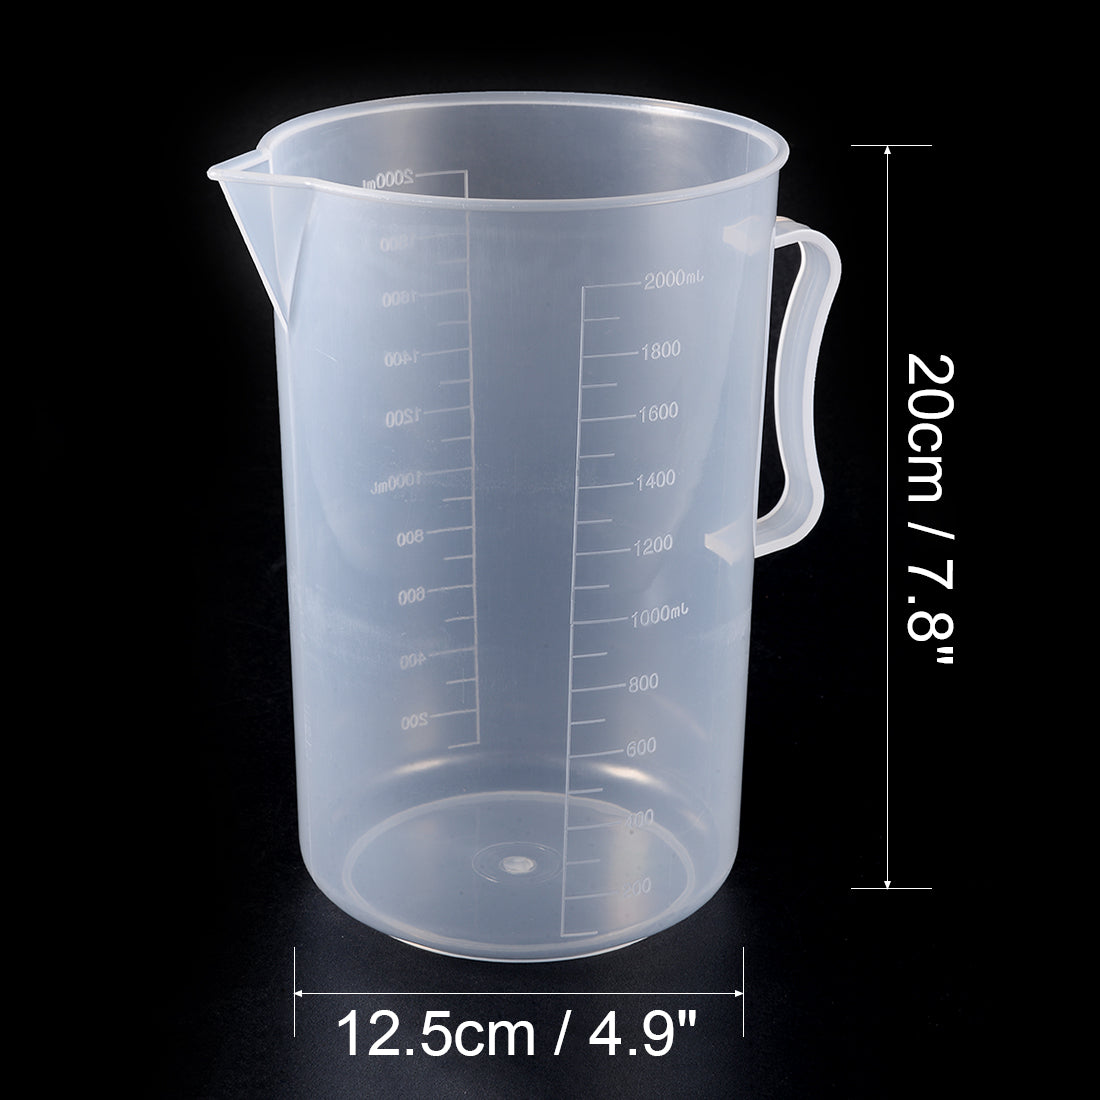 uxcell Uxcell 2pcs Laboratory Clear White PP 2000mL Measuring Cup Handled Beaker